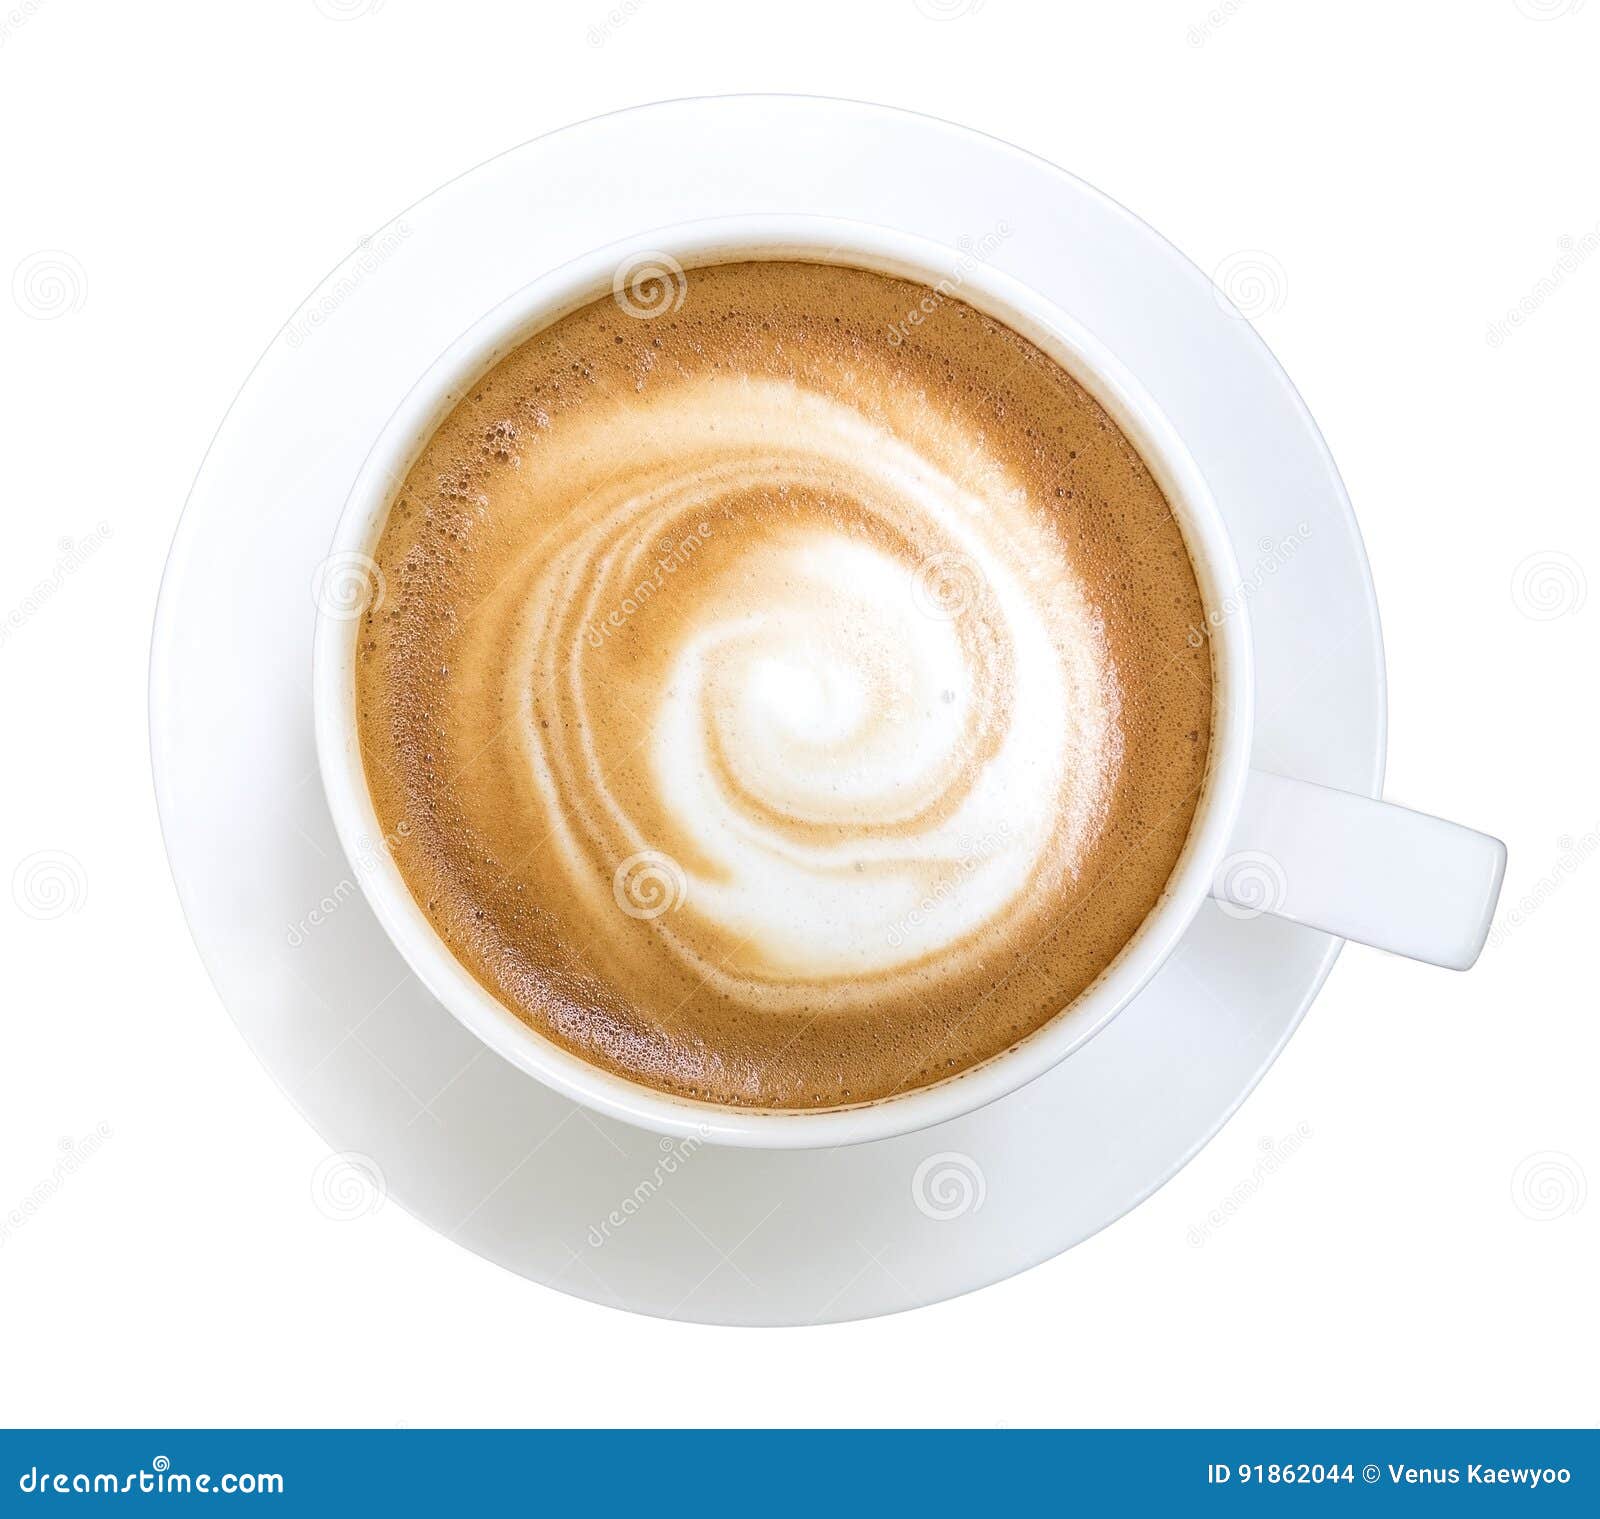 top view of hot coffee cappuccino  on white background, clipping path included